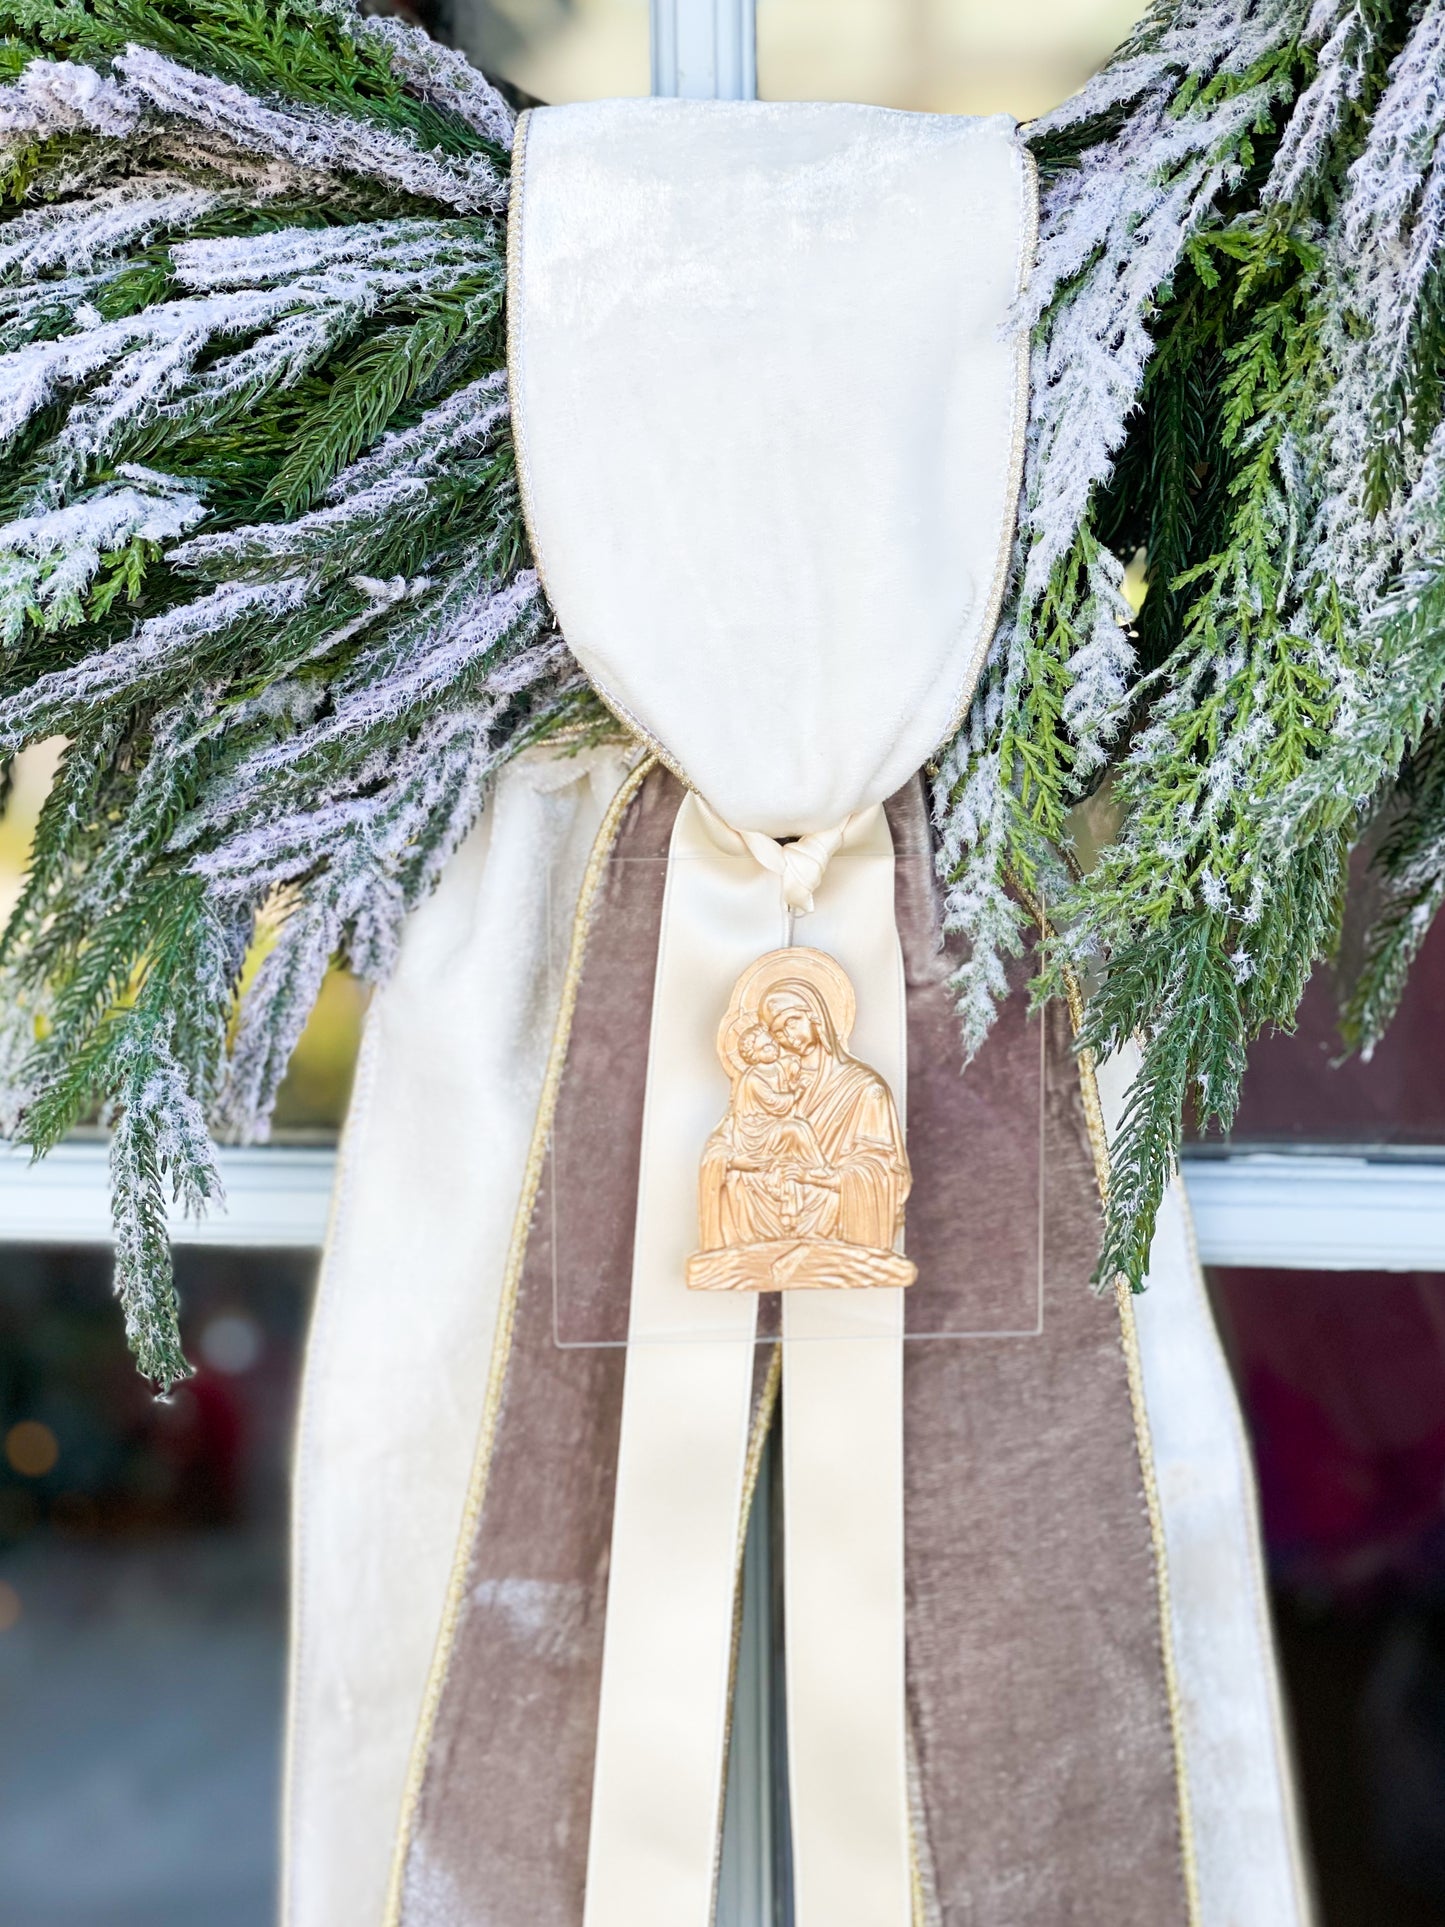 Emmanuel Wreath And Sash With Madonna And Child Ornament